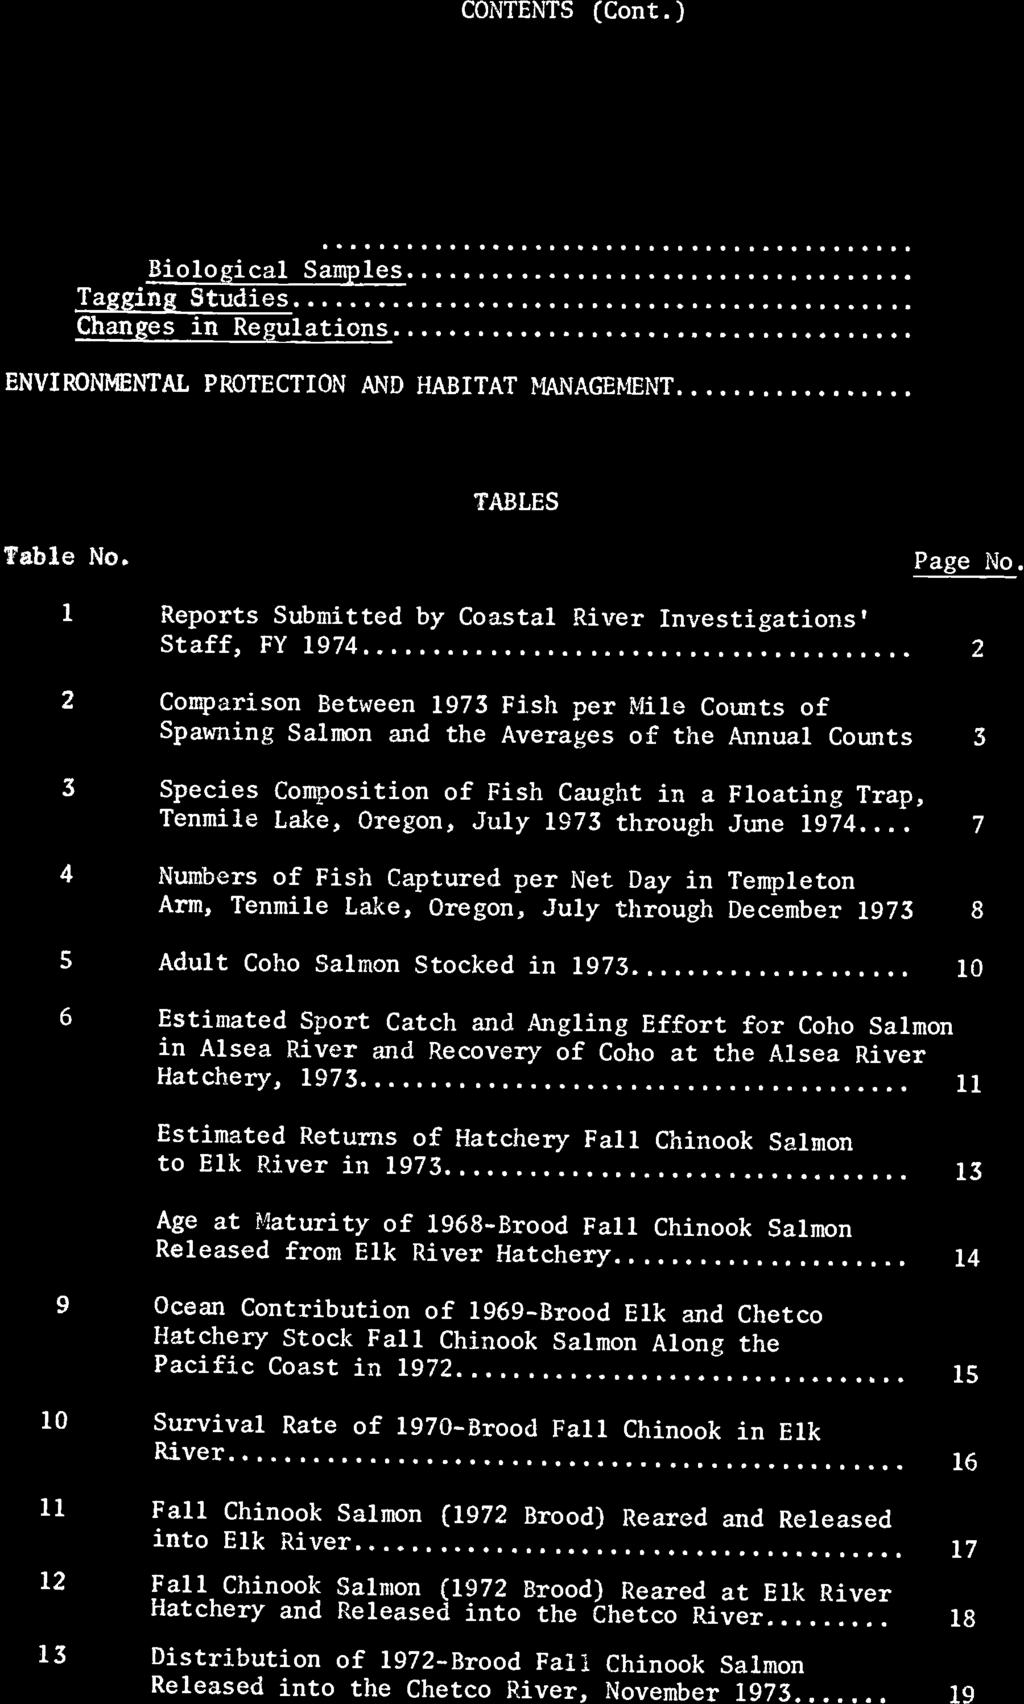 CONTENTS (Cont.) Page No. SHAD AND STRIPED BASS. 1973 Commercial Fishery Statistics... LicenseSales... Shad and Striped Bass Landings... Catch/Effort Biological Samples... TaggingStudies.